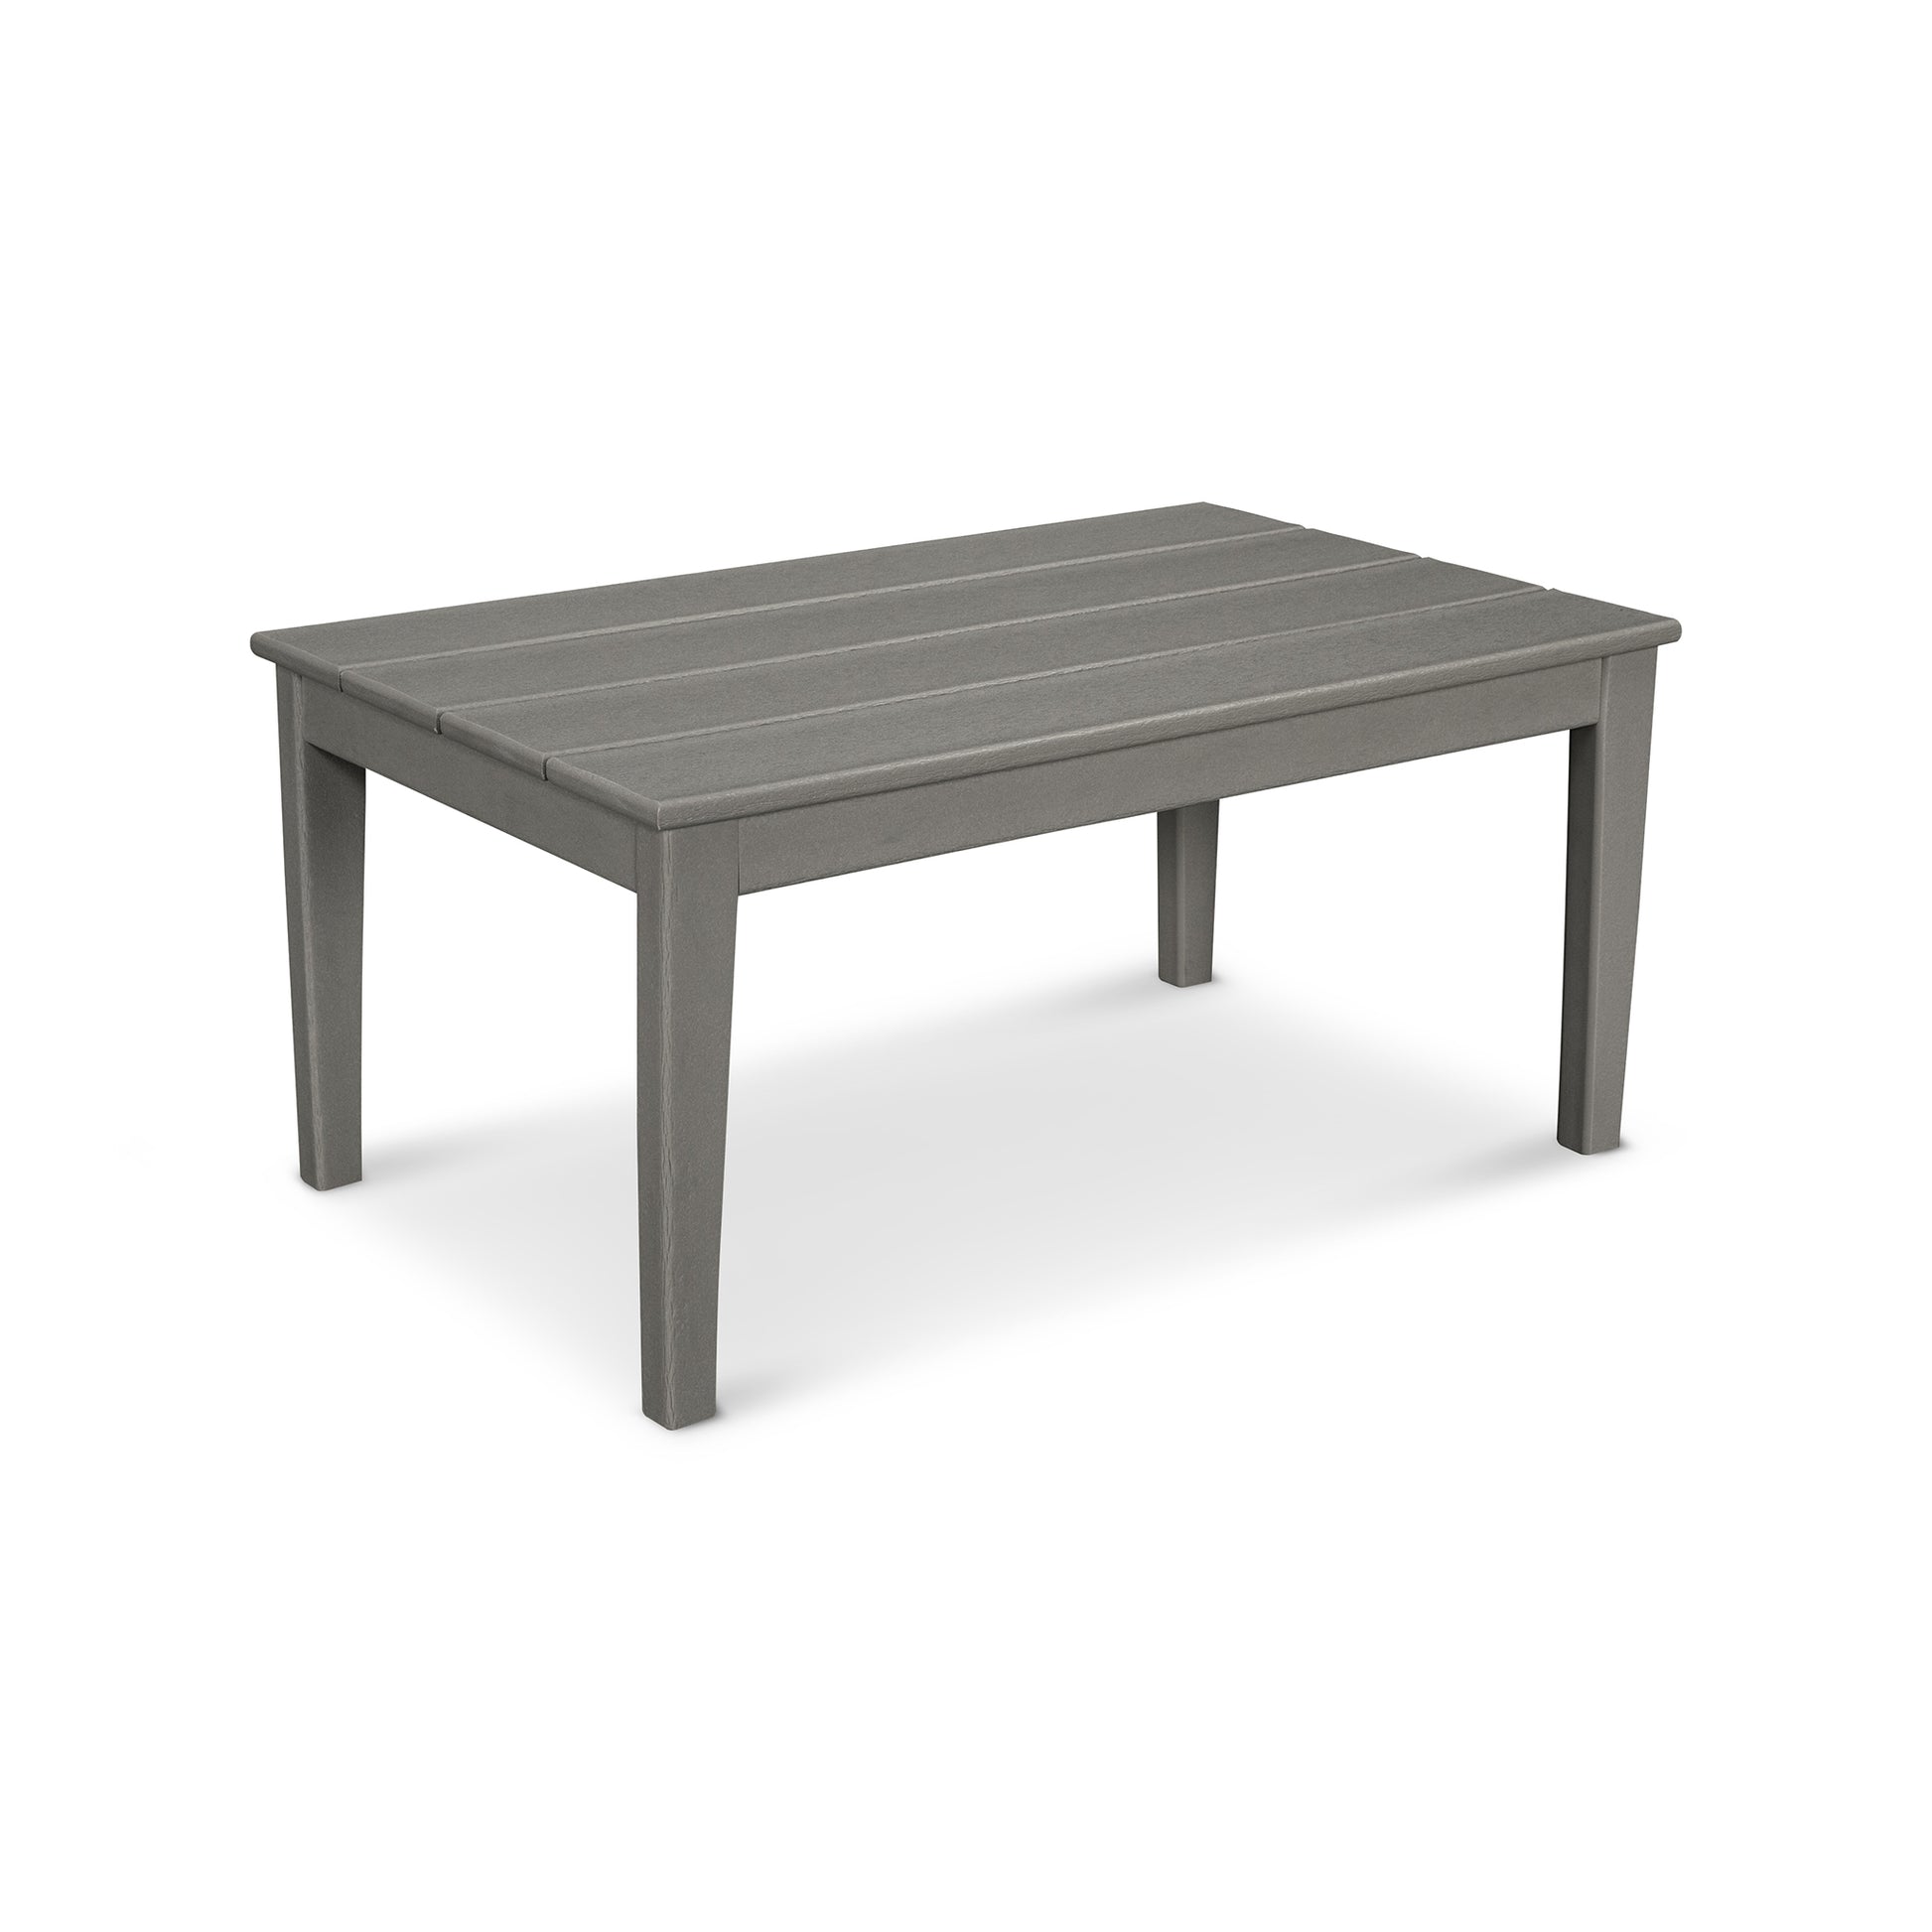 A simple, rectangular, gray POLYWOOD® Newport 22"x36" Coffee Table made of textured plastic, pictured against a plain white background.